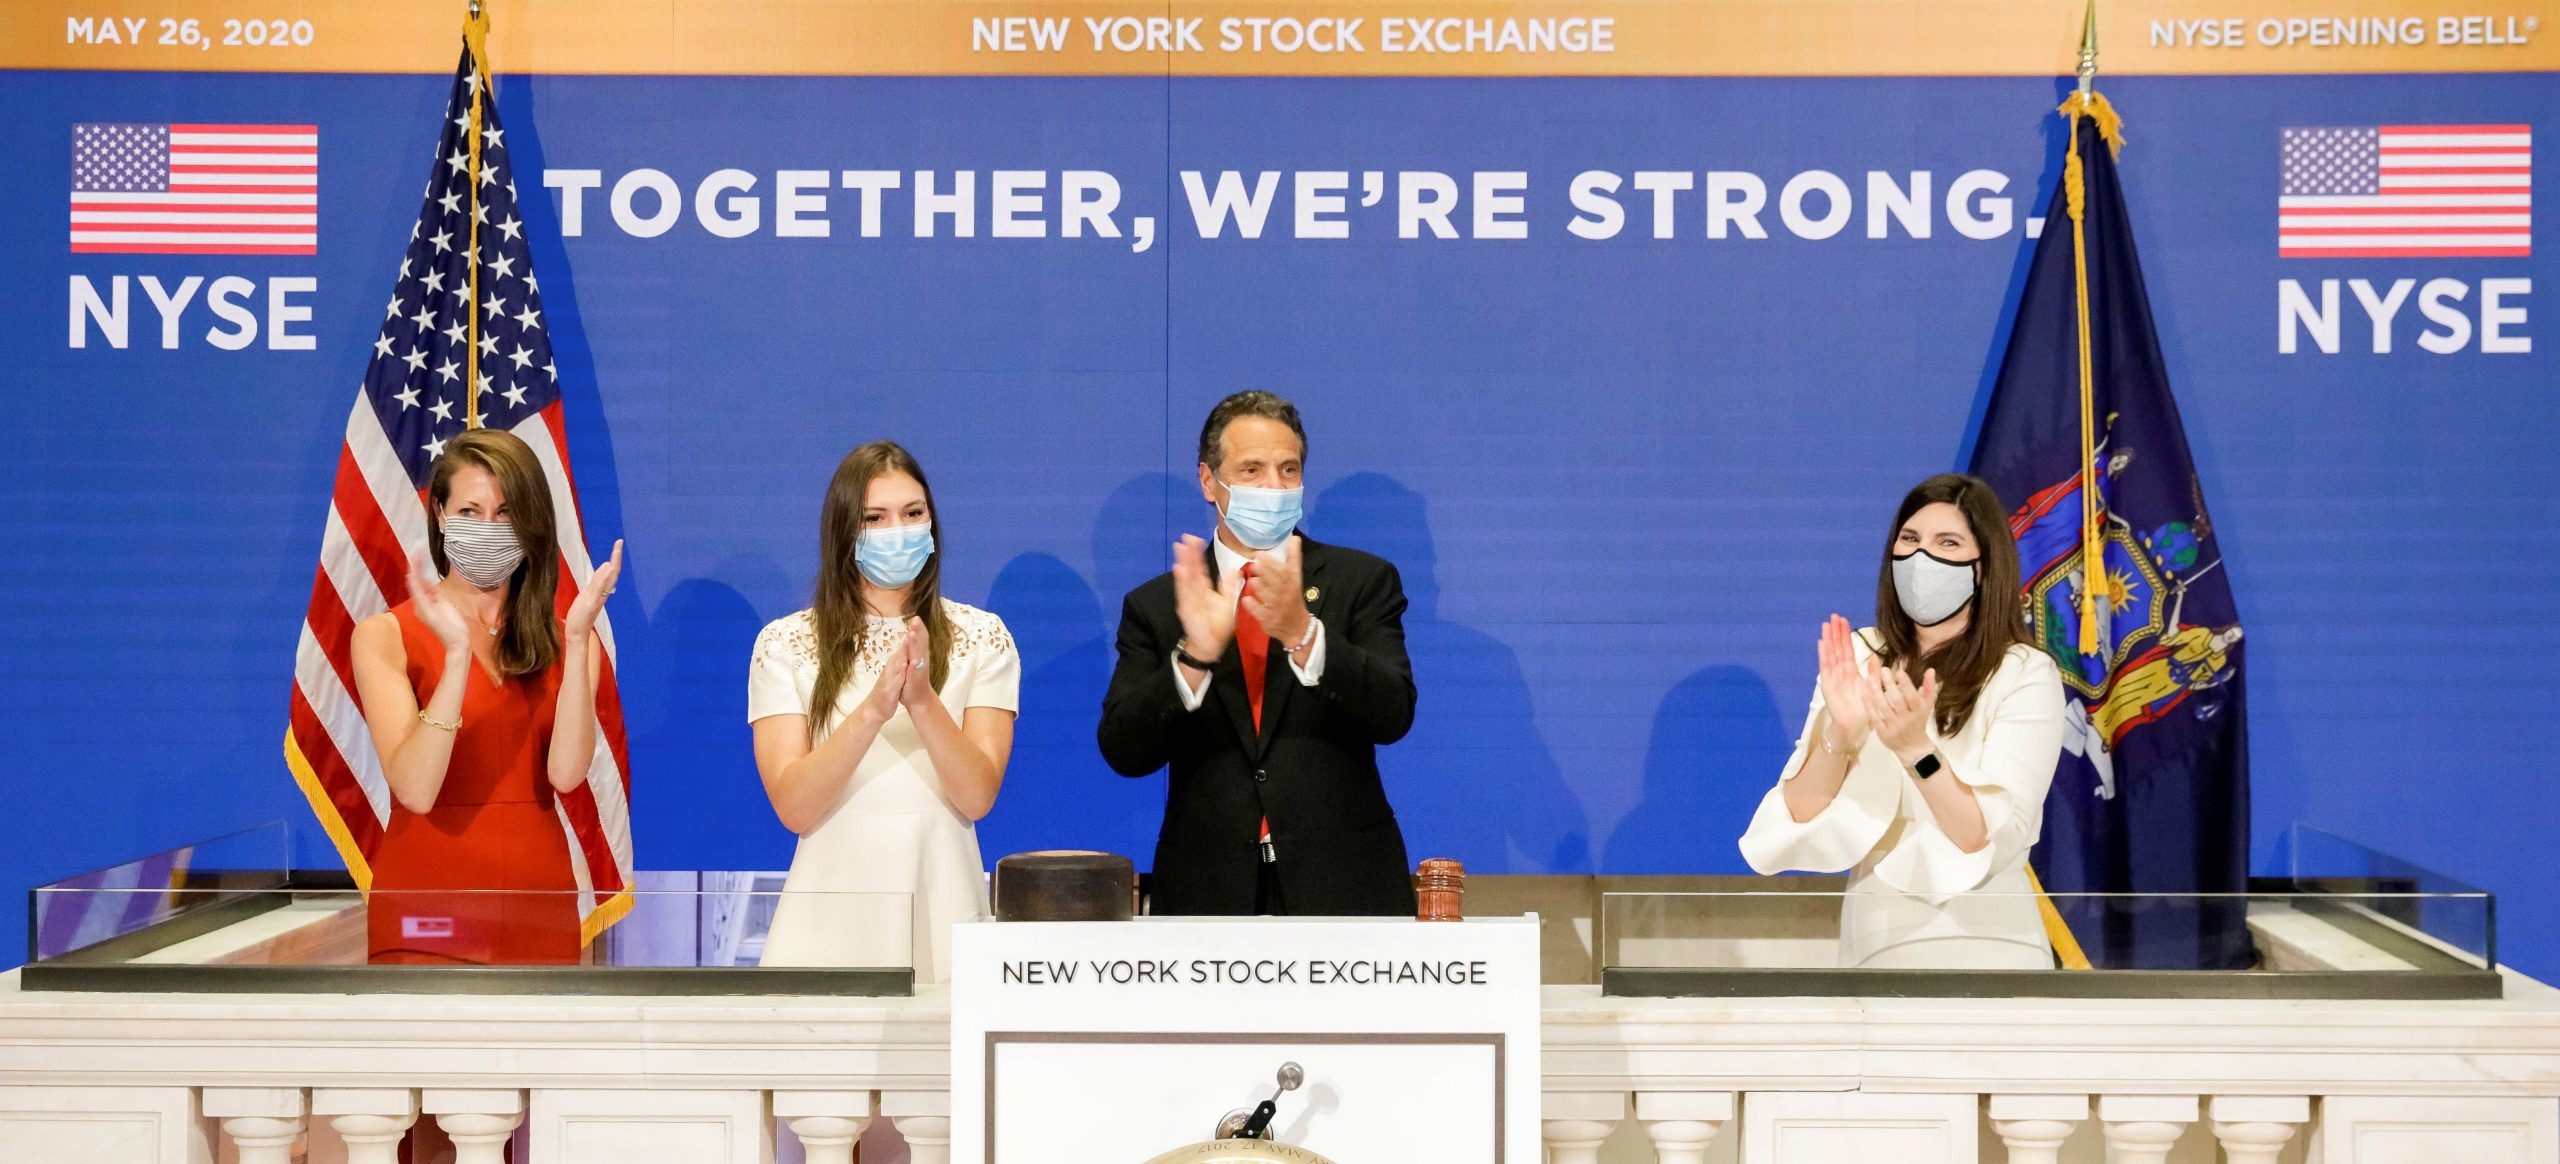 epa08446152 A handout photo made available by the New York Stock Exchange (NYSE) shows New York Governor Andrew Cuomo (C) clap while ringing the Opening Bell of the New York Stock Exchange and standing with NYSE President Stacey Cunningham (R), Melissa DeRosa (L), Secretary to the governor, and Mariah Kennedy Cuomo (2-L), the governor’s daughter, at the New York Stock Exchange in New York, New York, USA, on 26 May 2020. Today is the first day that the stock exchange is reopen for in-person trading after the building was closed in March due to the coronavirus pandemic.  EPA/NYSE HANDOUT  HANDOUT EDITORIAL USE ONLY/NO SALES